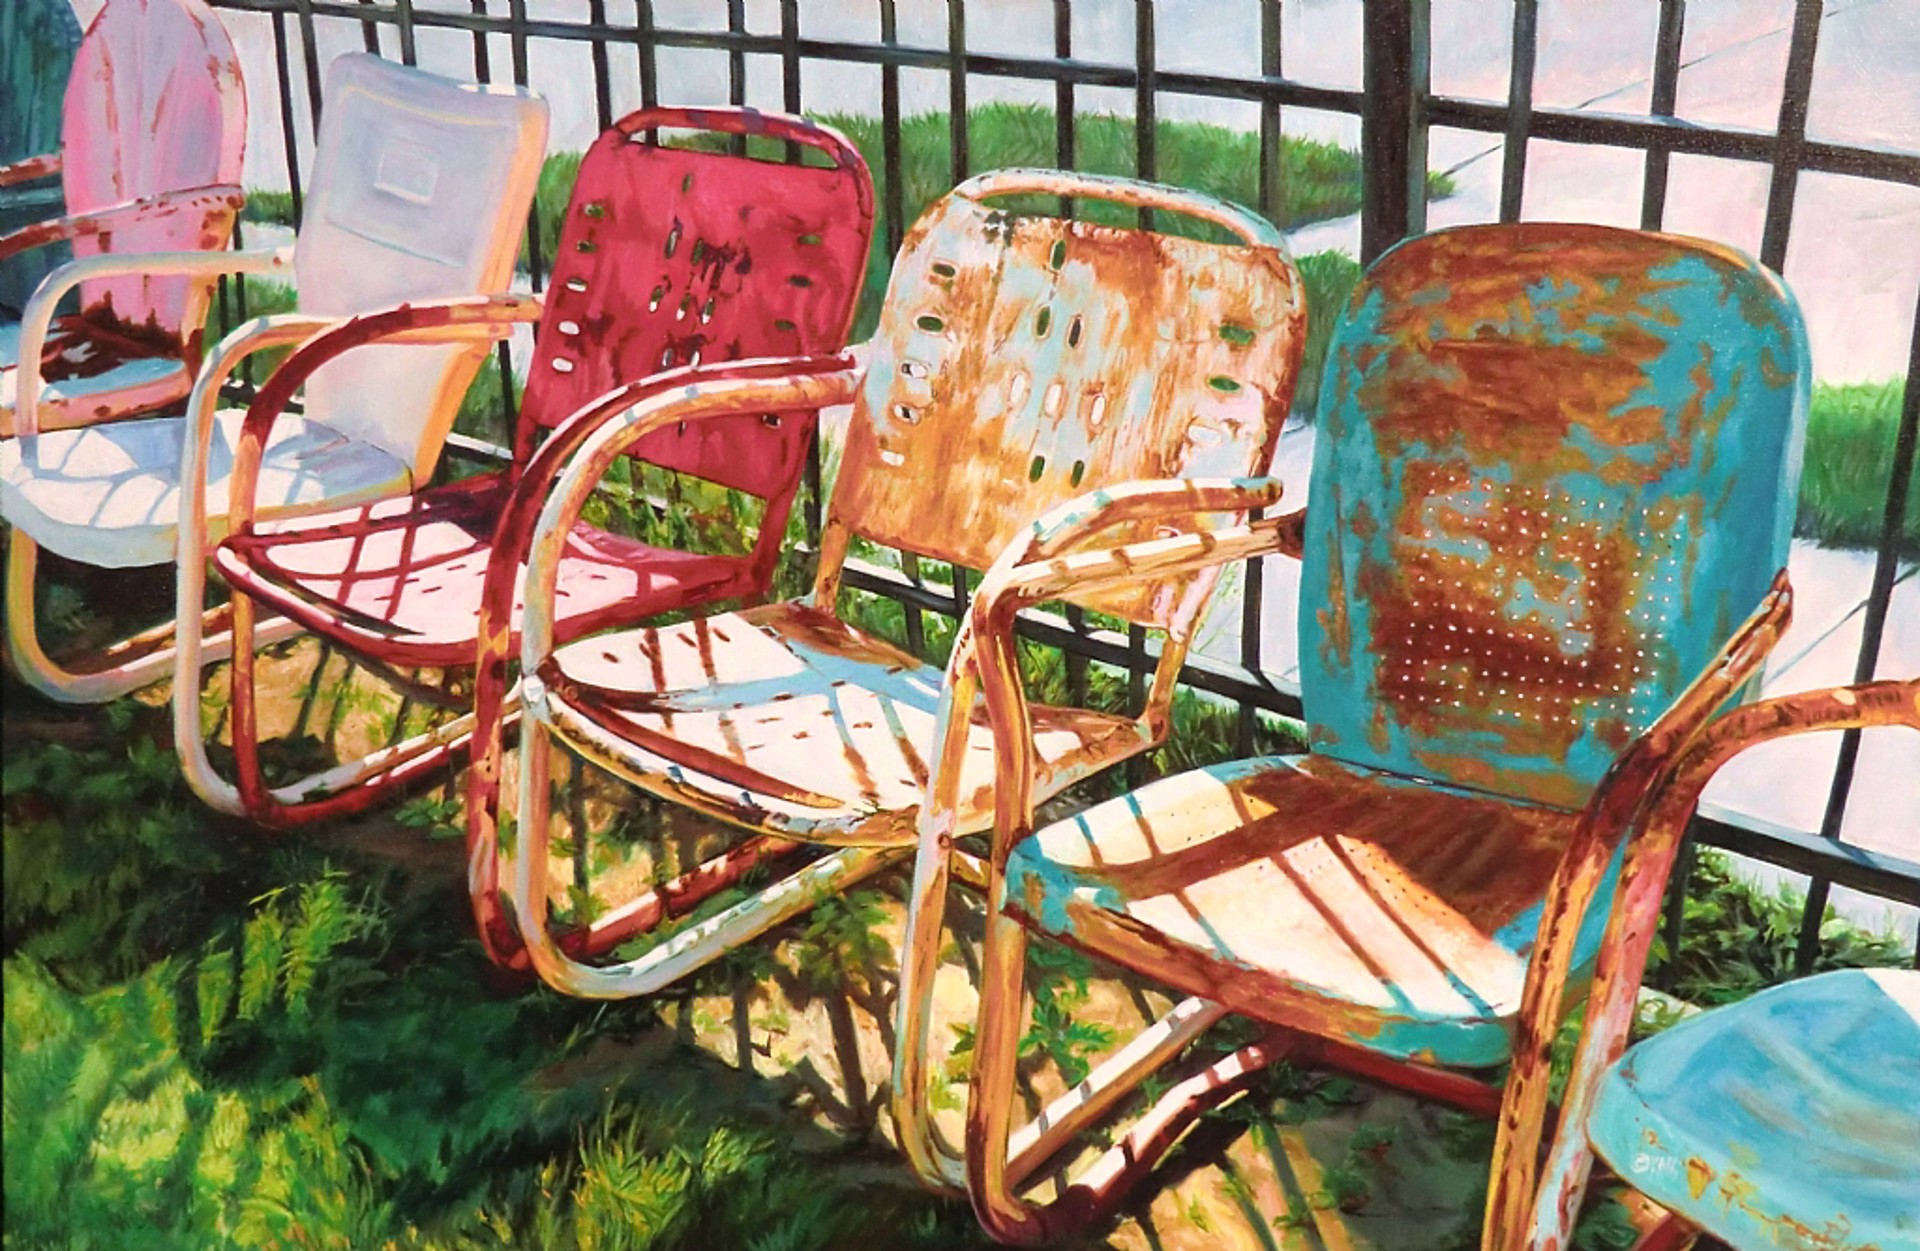 Retro Chairs commission by Katrina Swanson